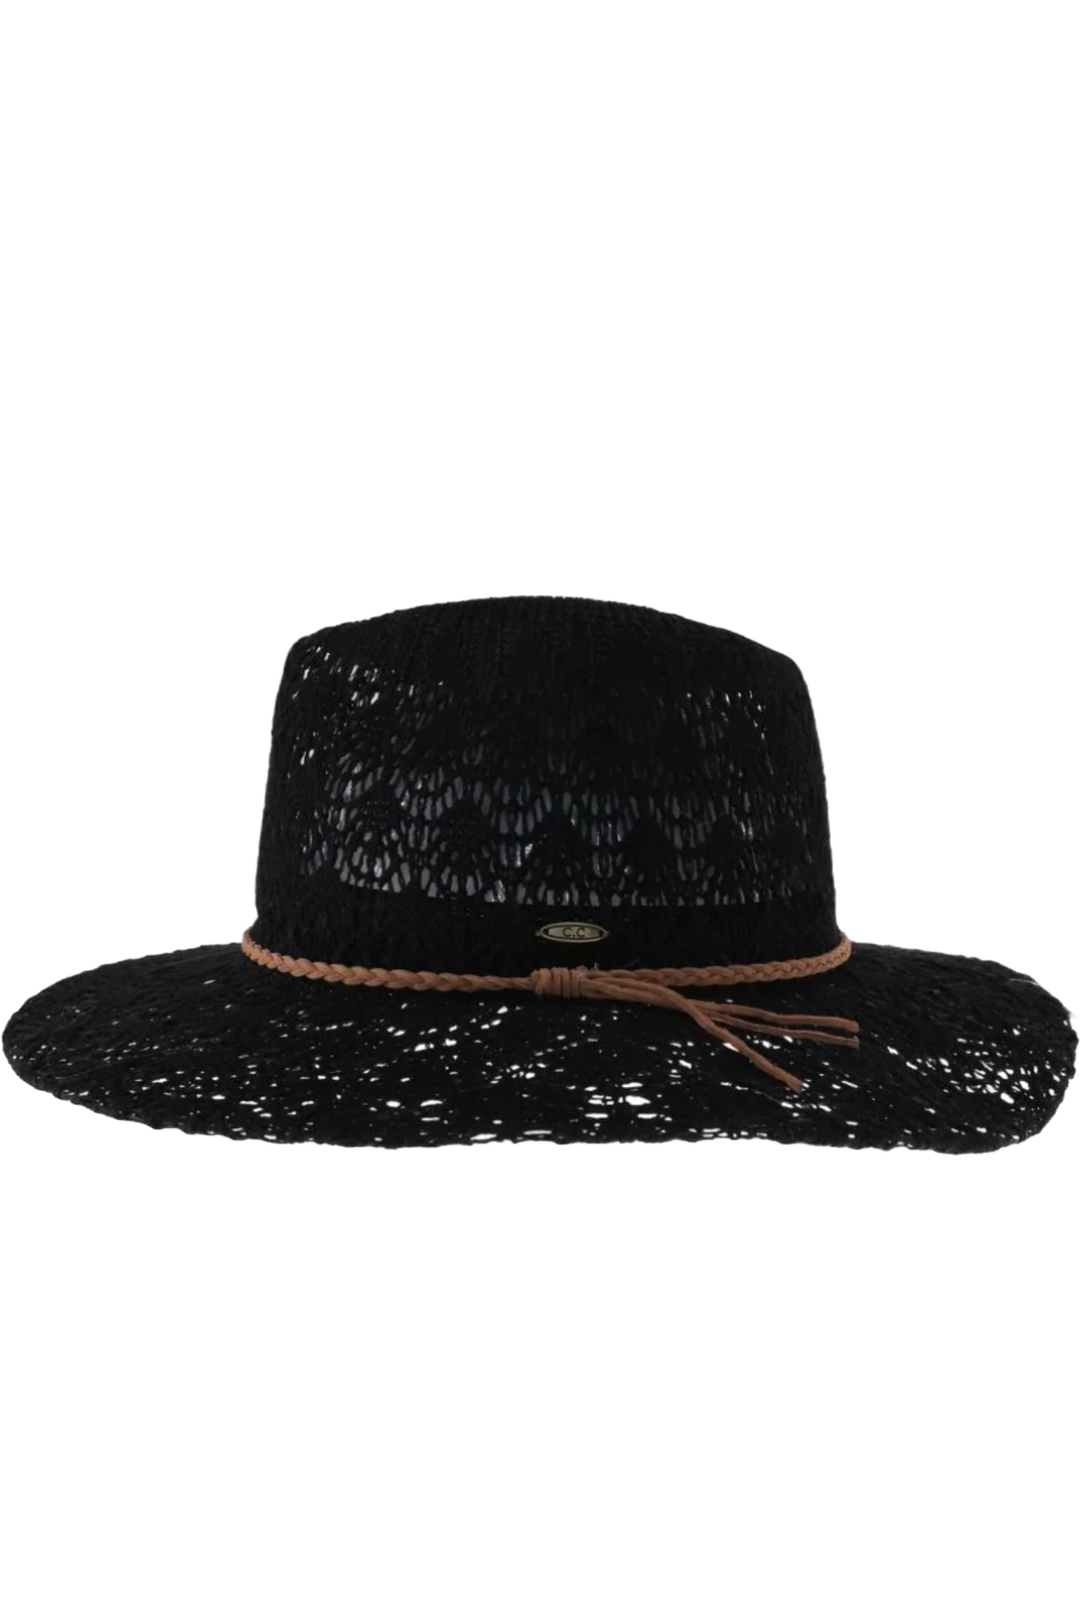 Horseshoe Lace Knit with Braided Suede Trim Panama Hat- Black